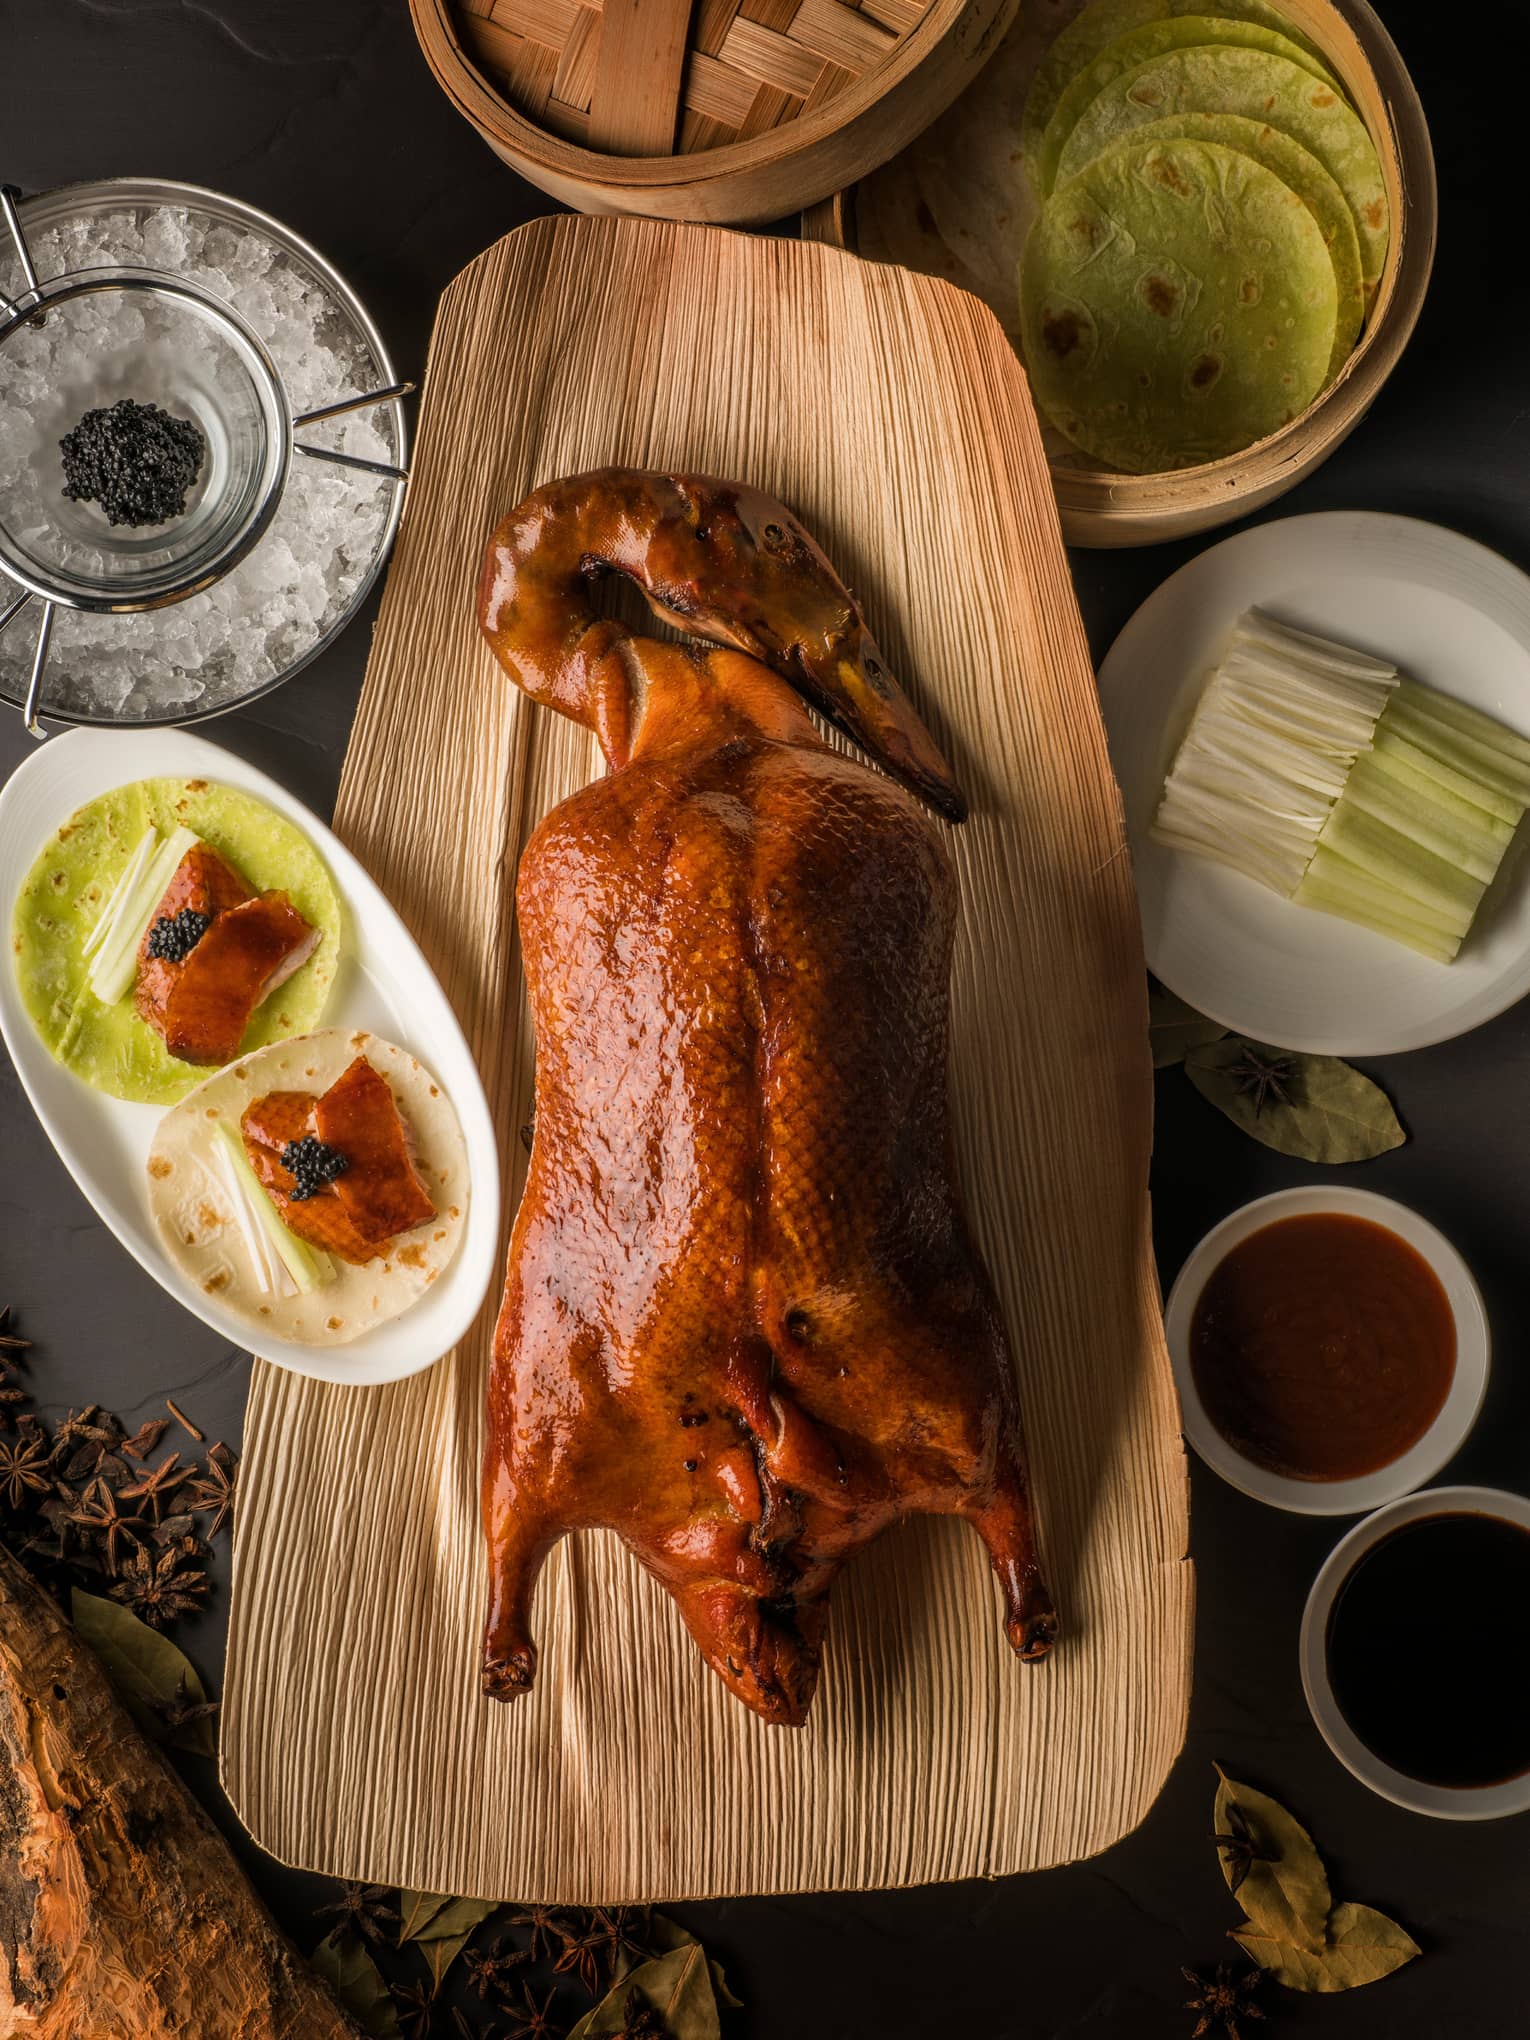 Aerial view of whole Peking duck on wood platter beside small dishes with slices